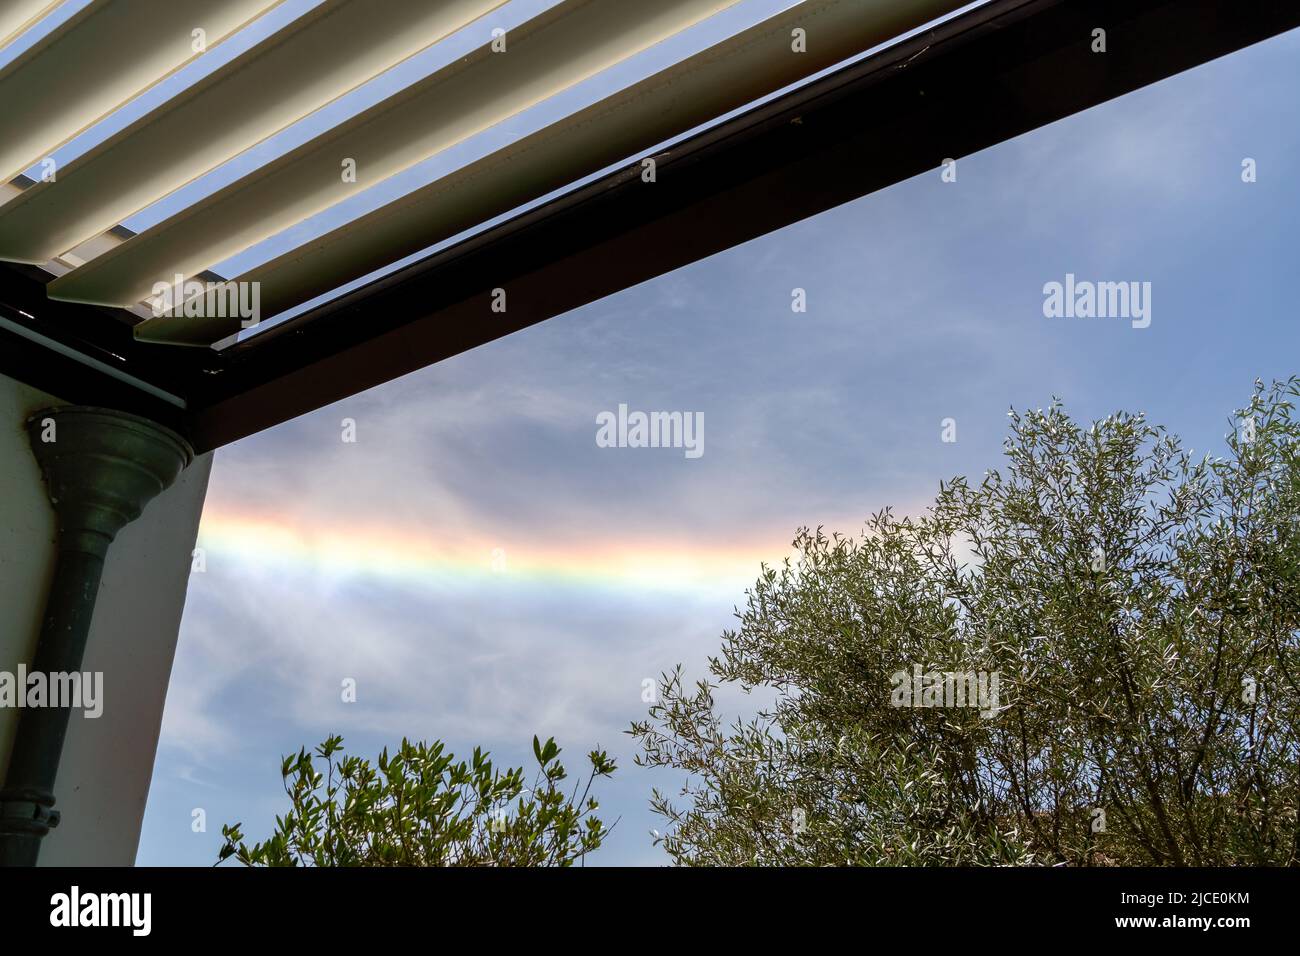 Colorful iridescent cloud, Beautiful Rainbow cloud over oliver trees and pergola La Rochelle France Stock Photo